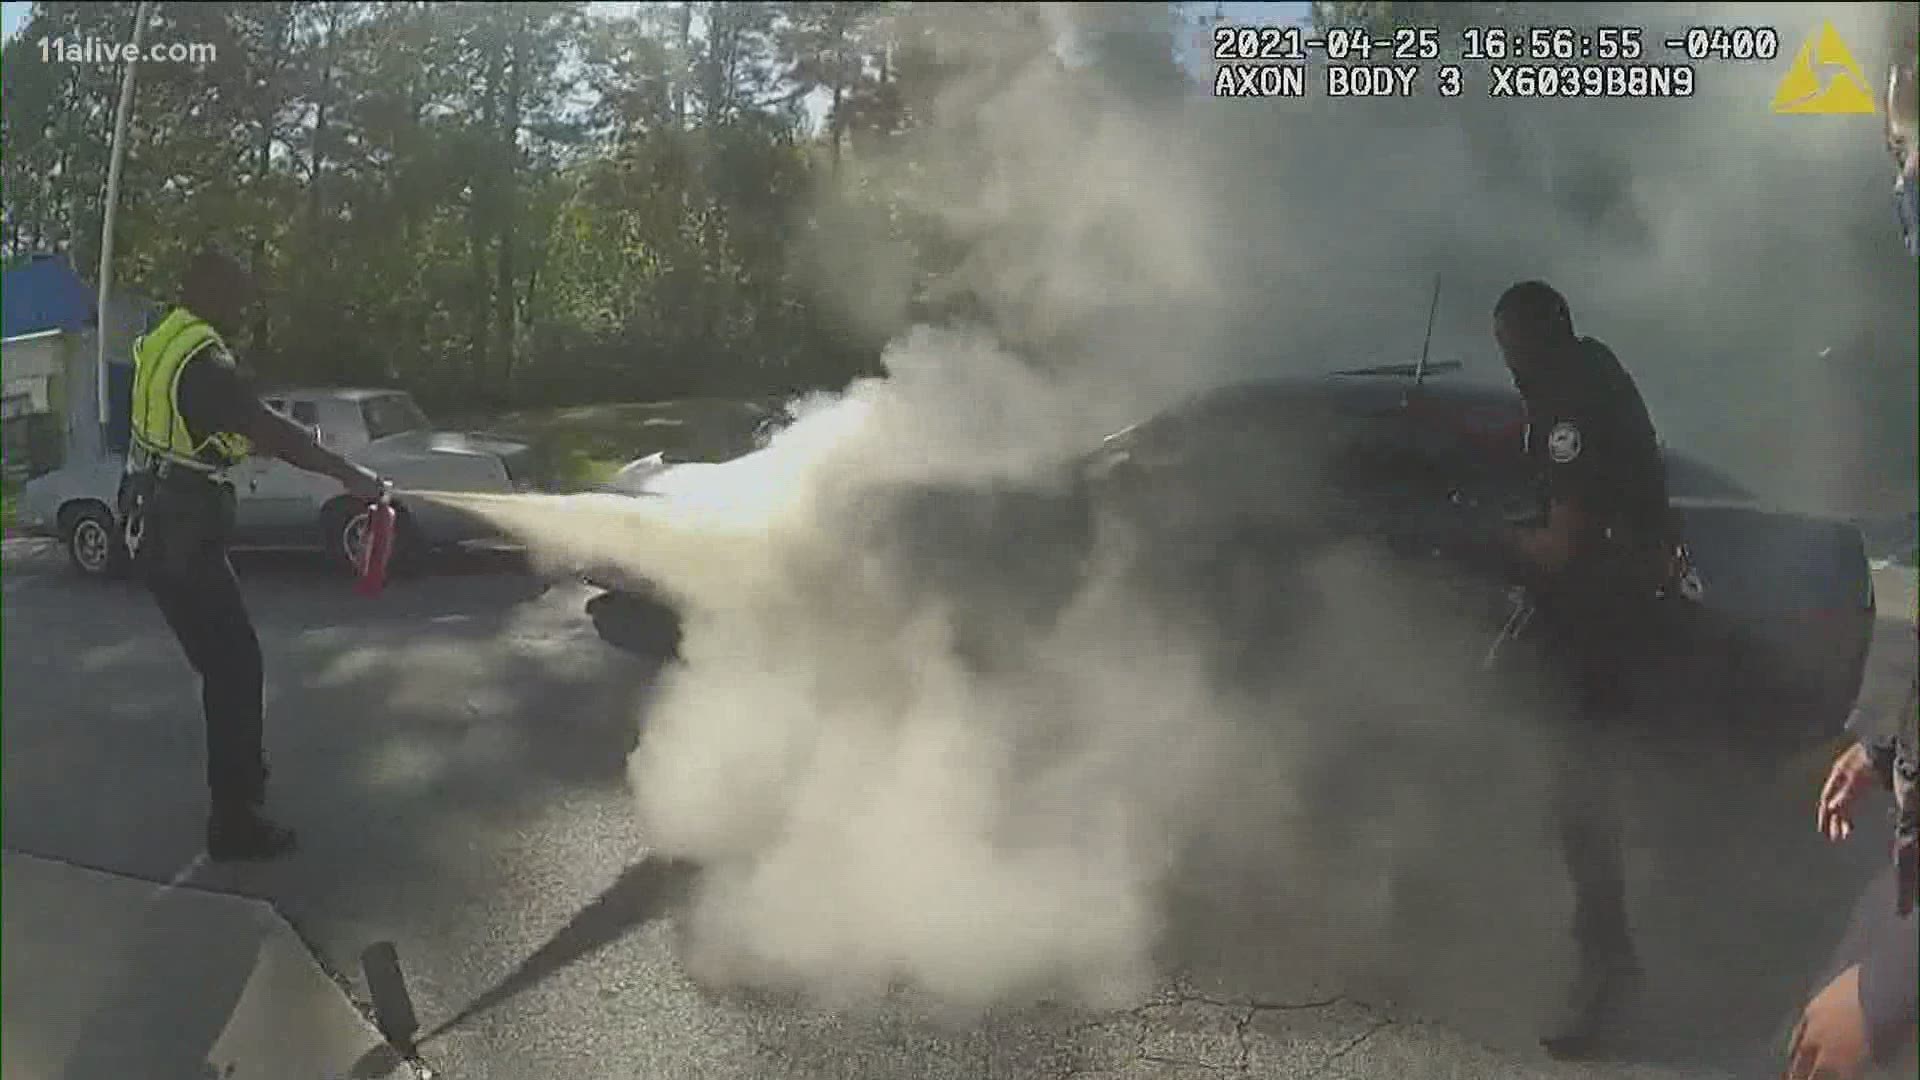 Police released a video showing the heroic moment officers break into a smoking car to save the driver